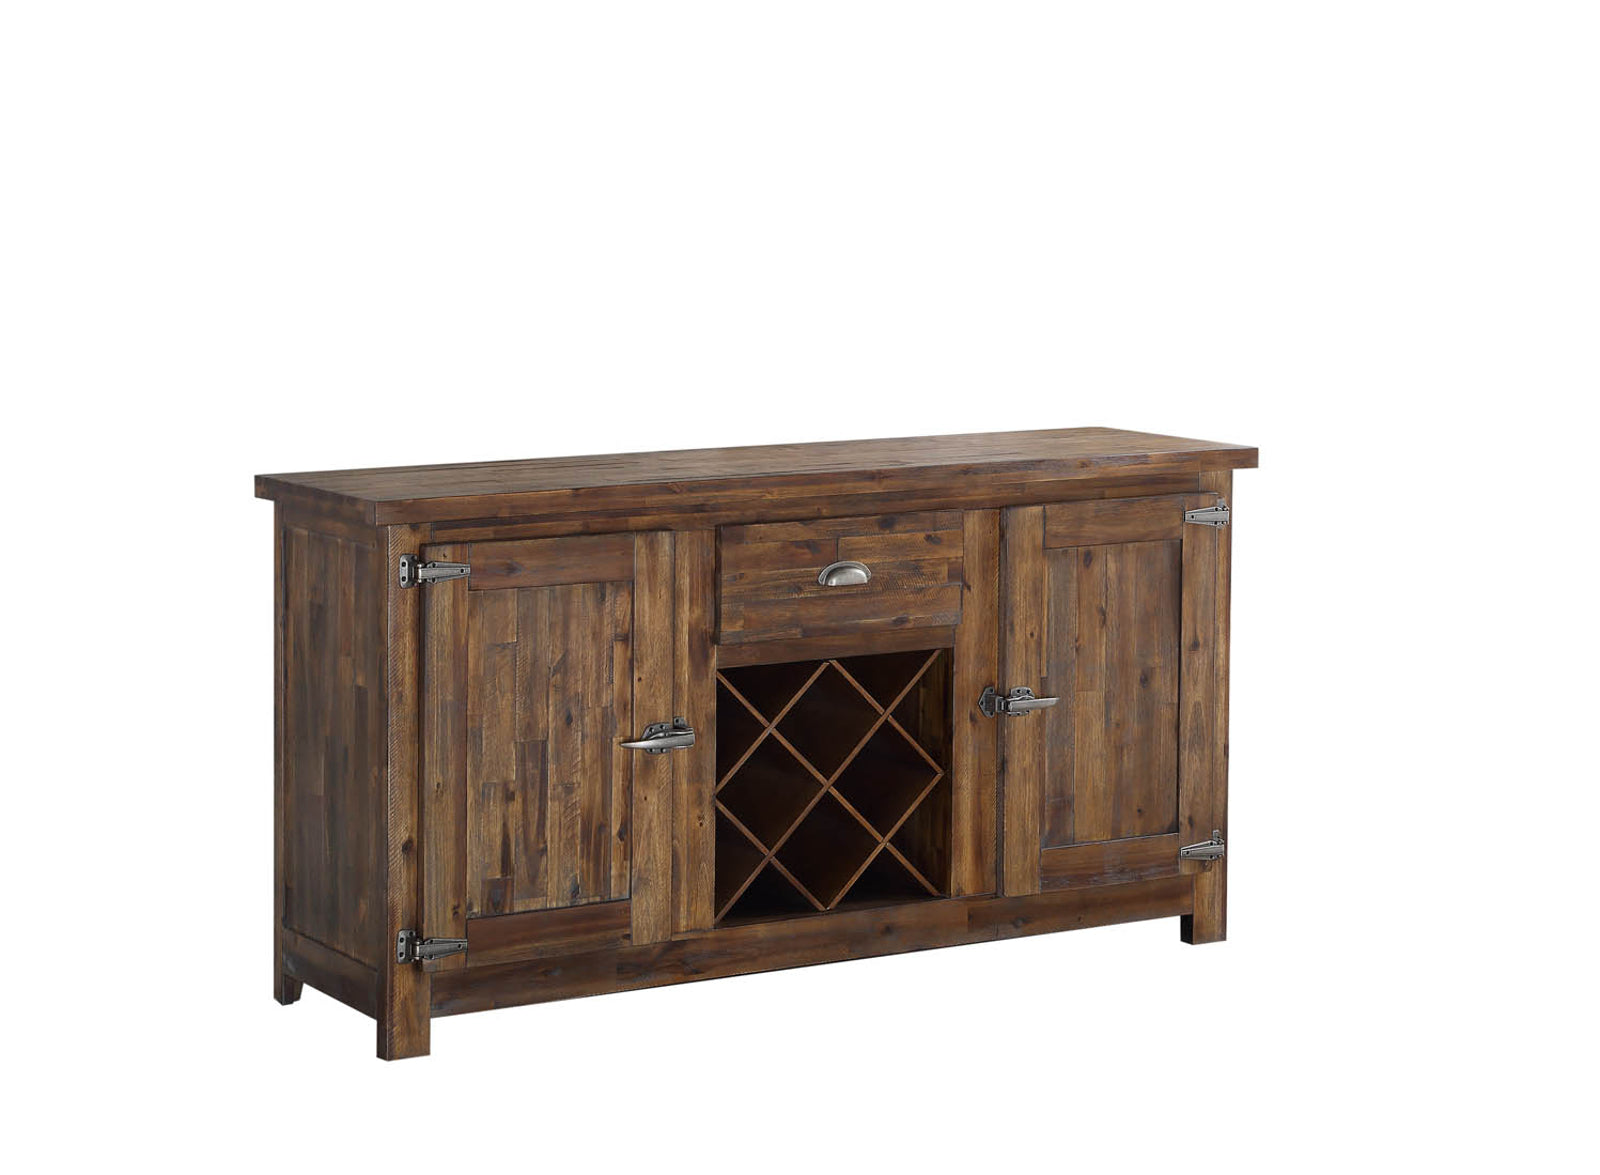 Fresno Dining Room Rustic Storage Server in Brown By: Alabama Beds